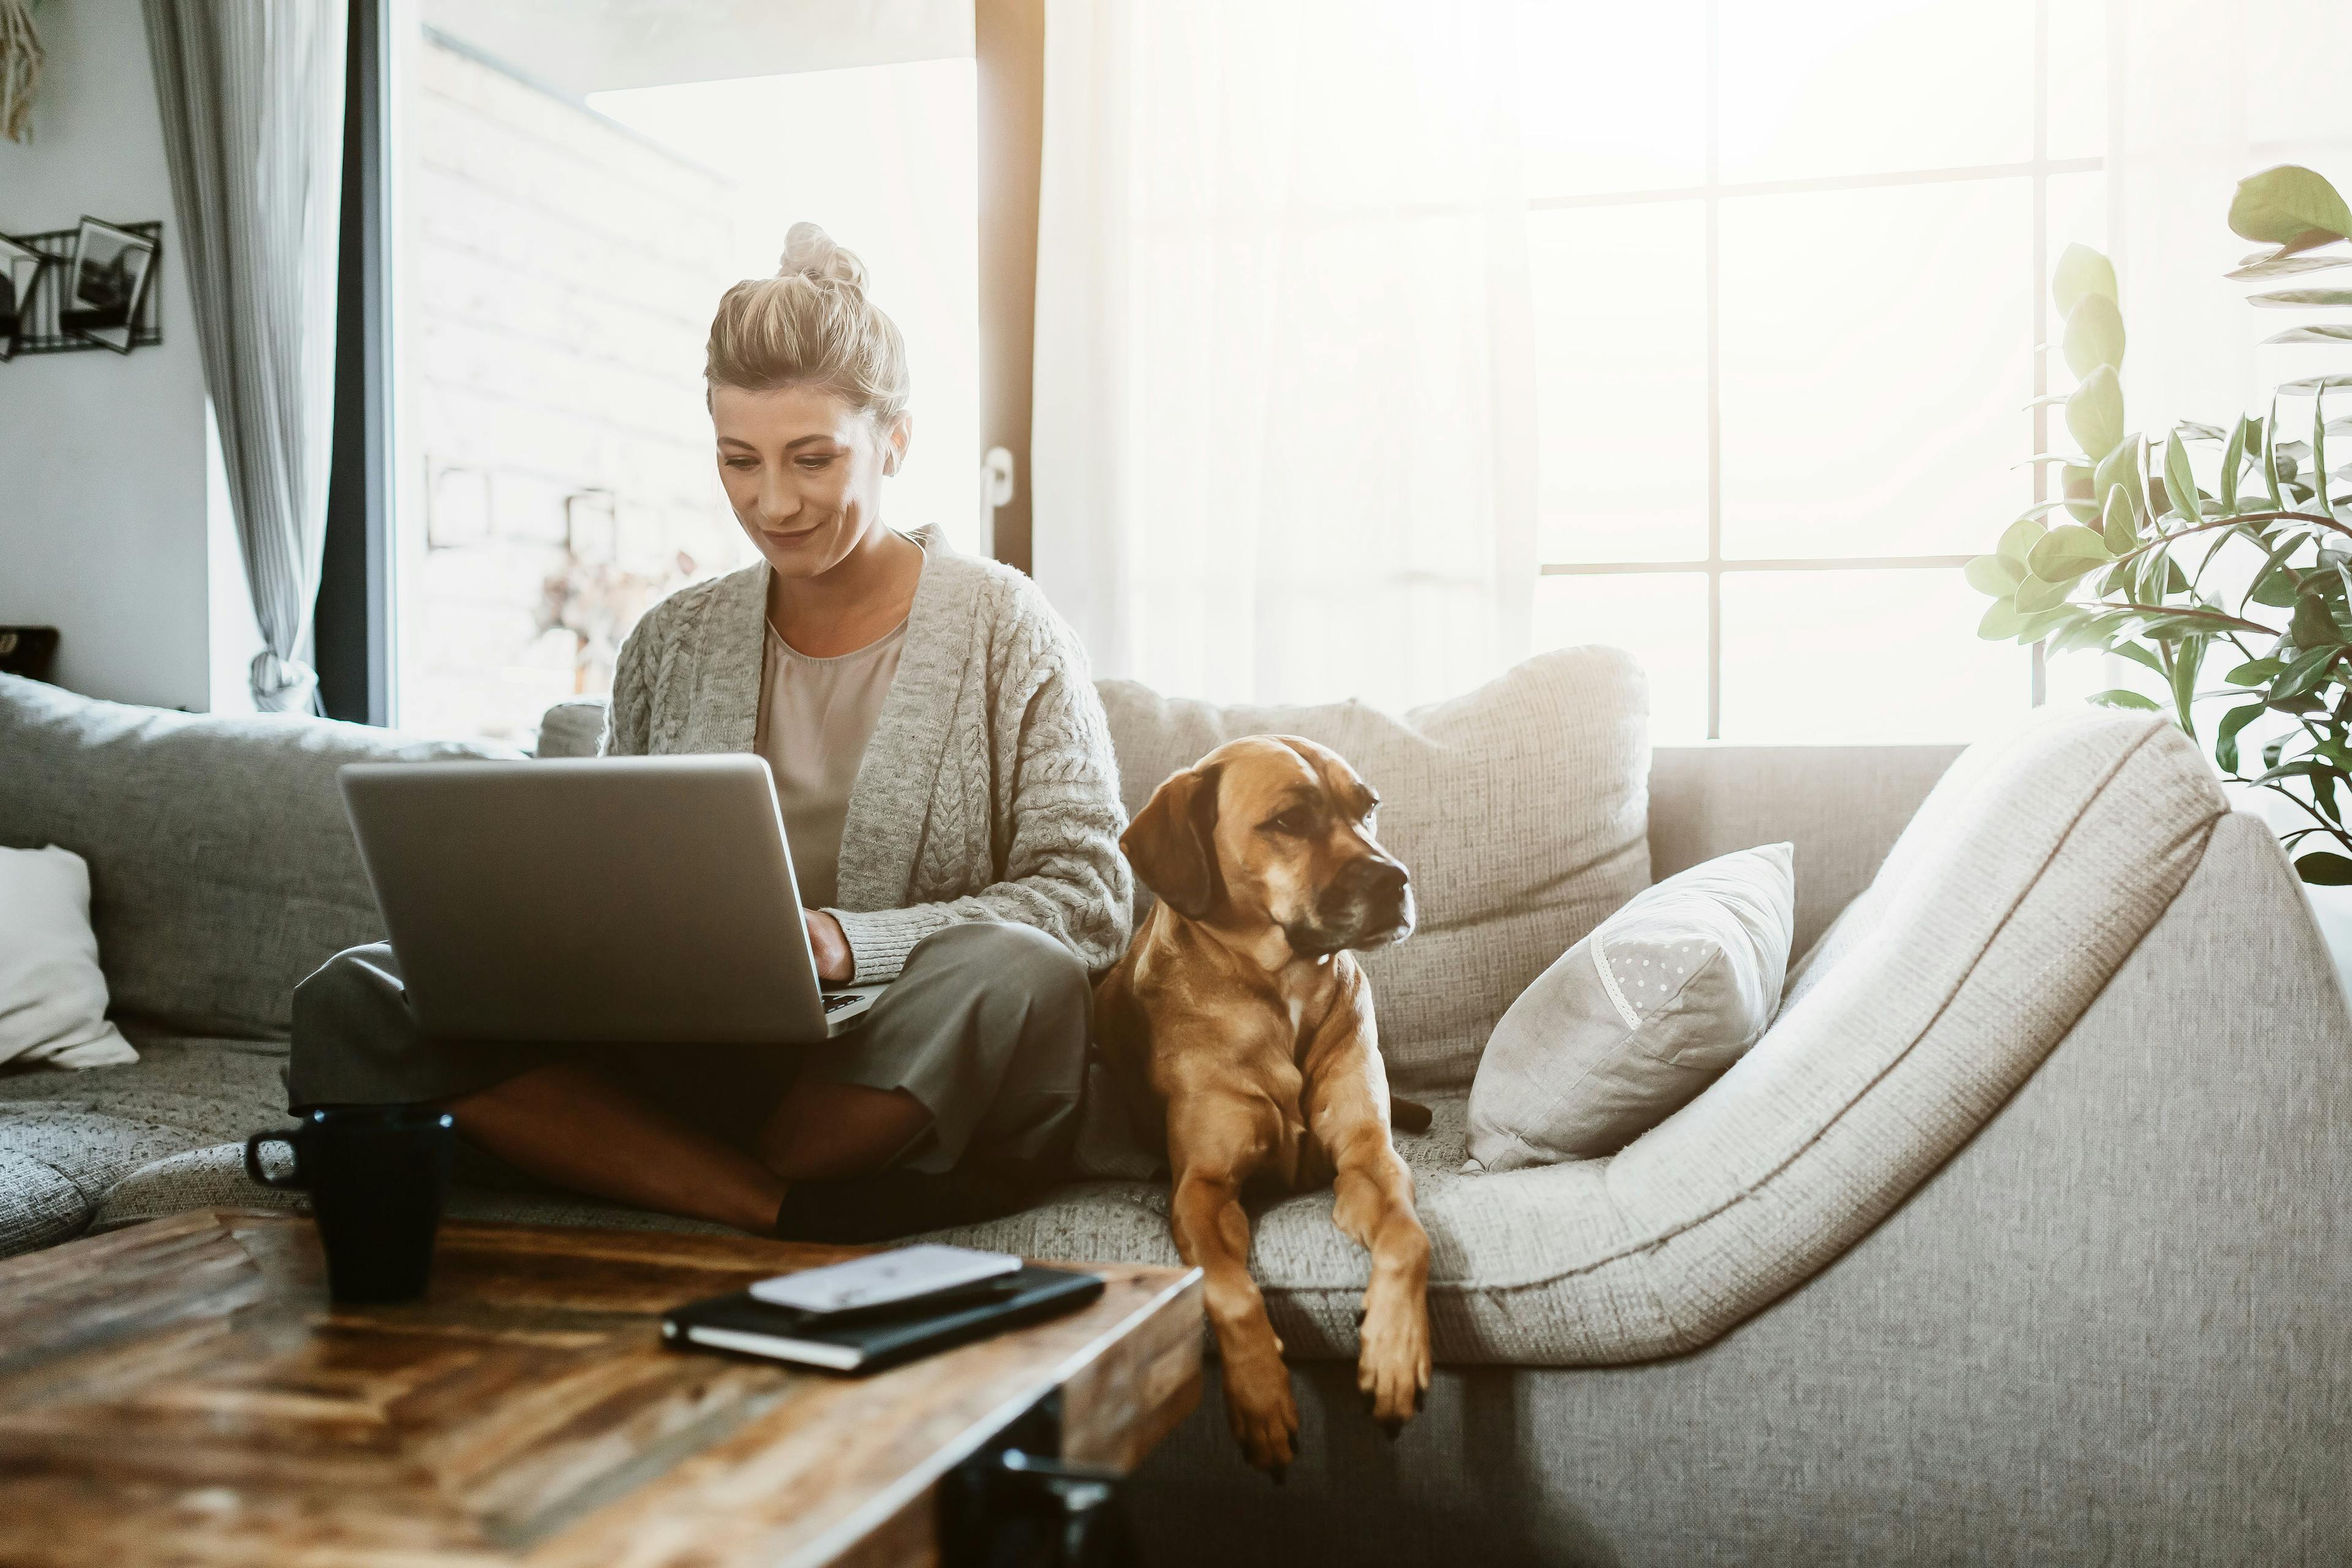 woman sits on couch with laptop and dog | © MT-R - stock.adobe.com